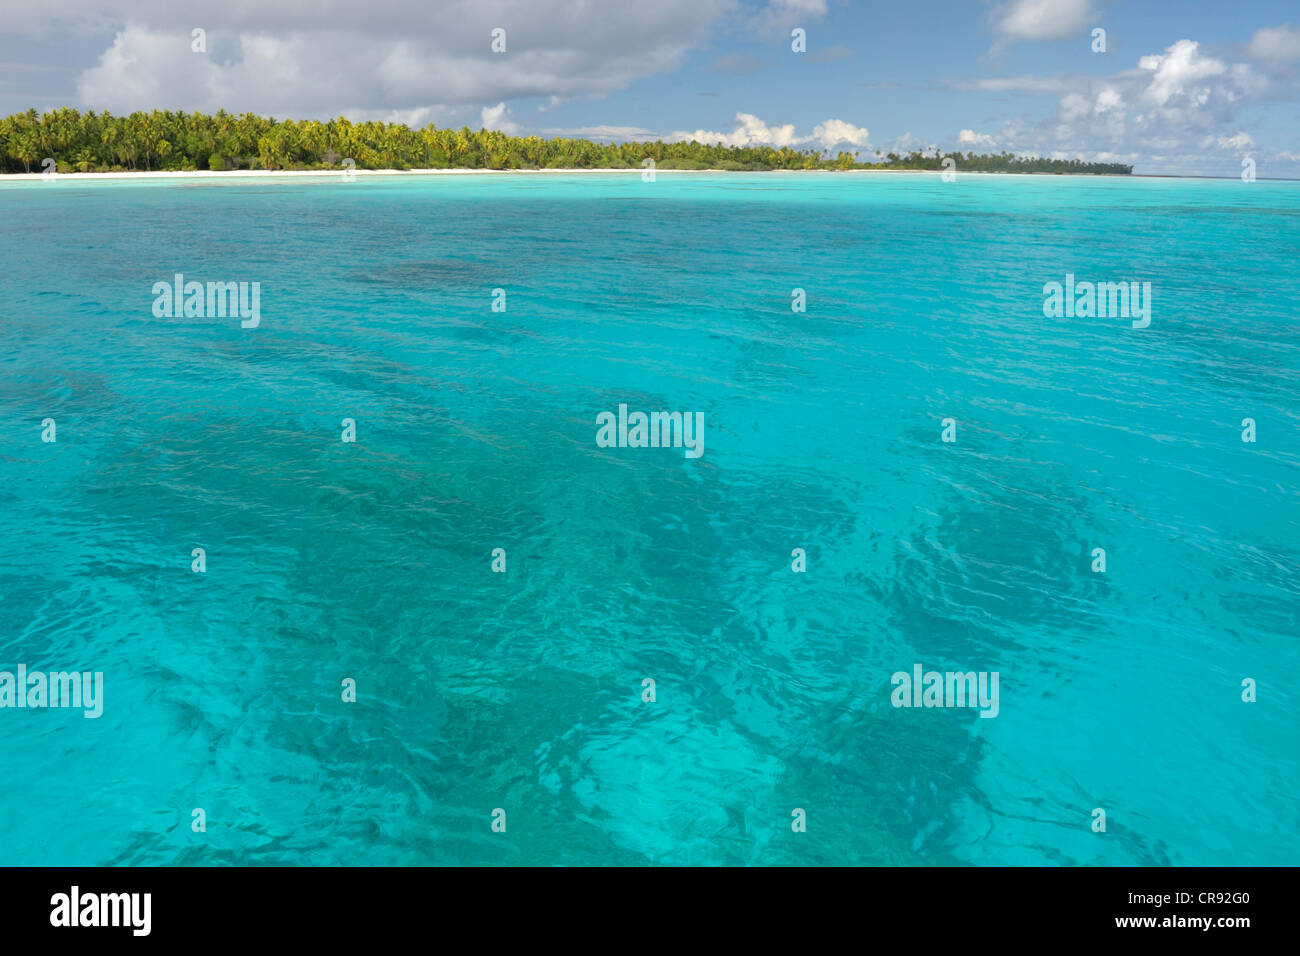 Coral heads below turquoise sea and the sandy beaches and palm trees of Makemo atoll, Tuamotus, French Polynesia Stock Photo